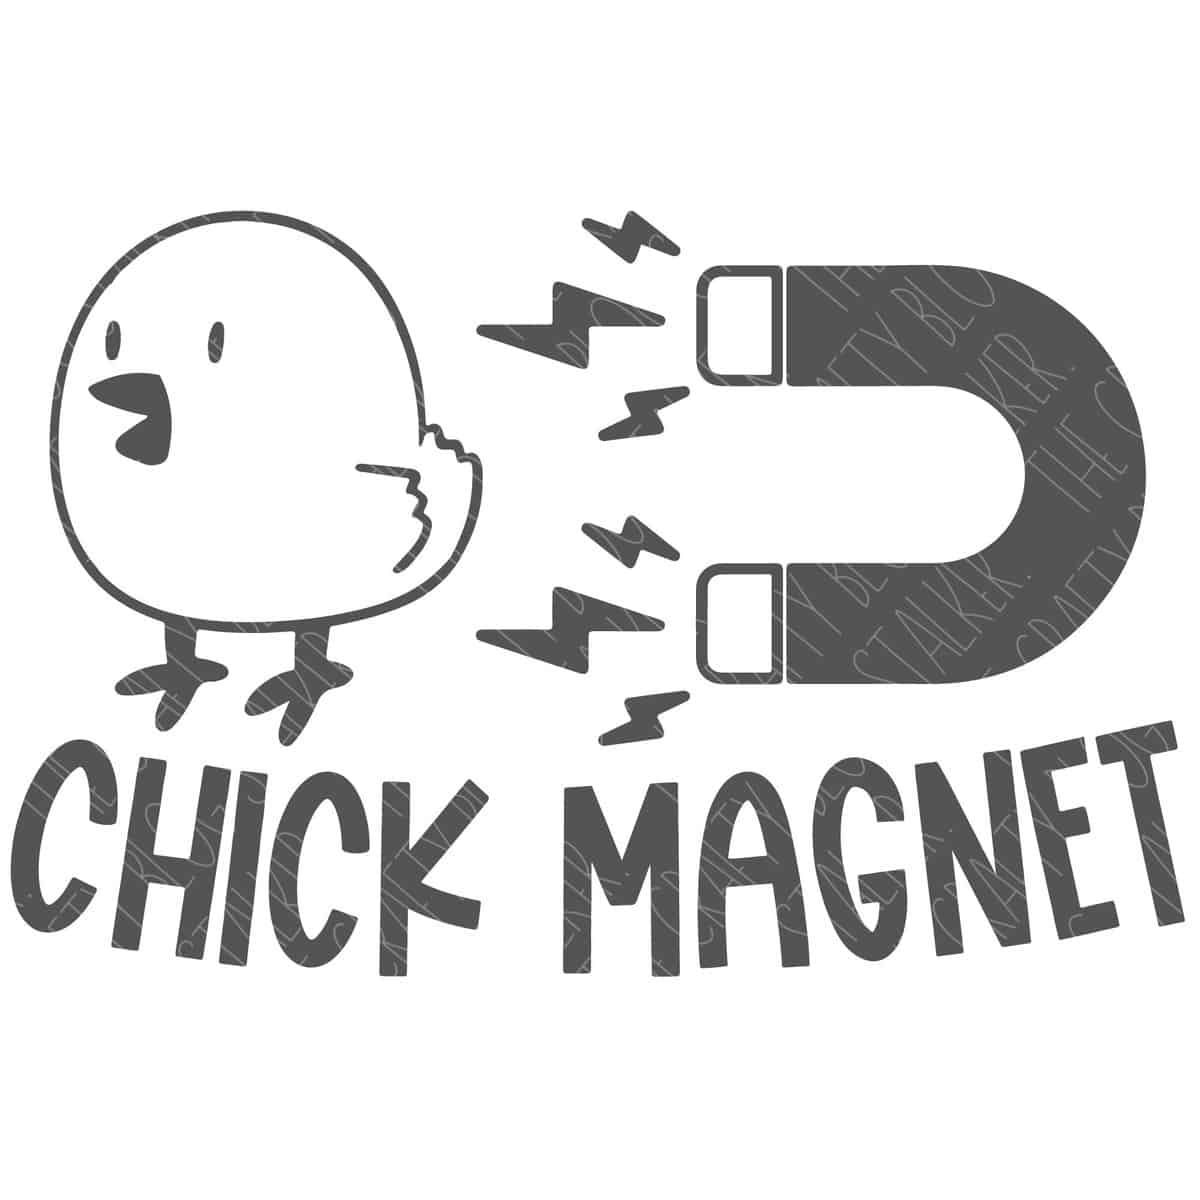 Chick Magnet SVG	

			
		
	

		
			$2.50 – Buy Now Checkout
							
					
						
							
						
						Added to cart